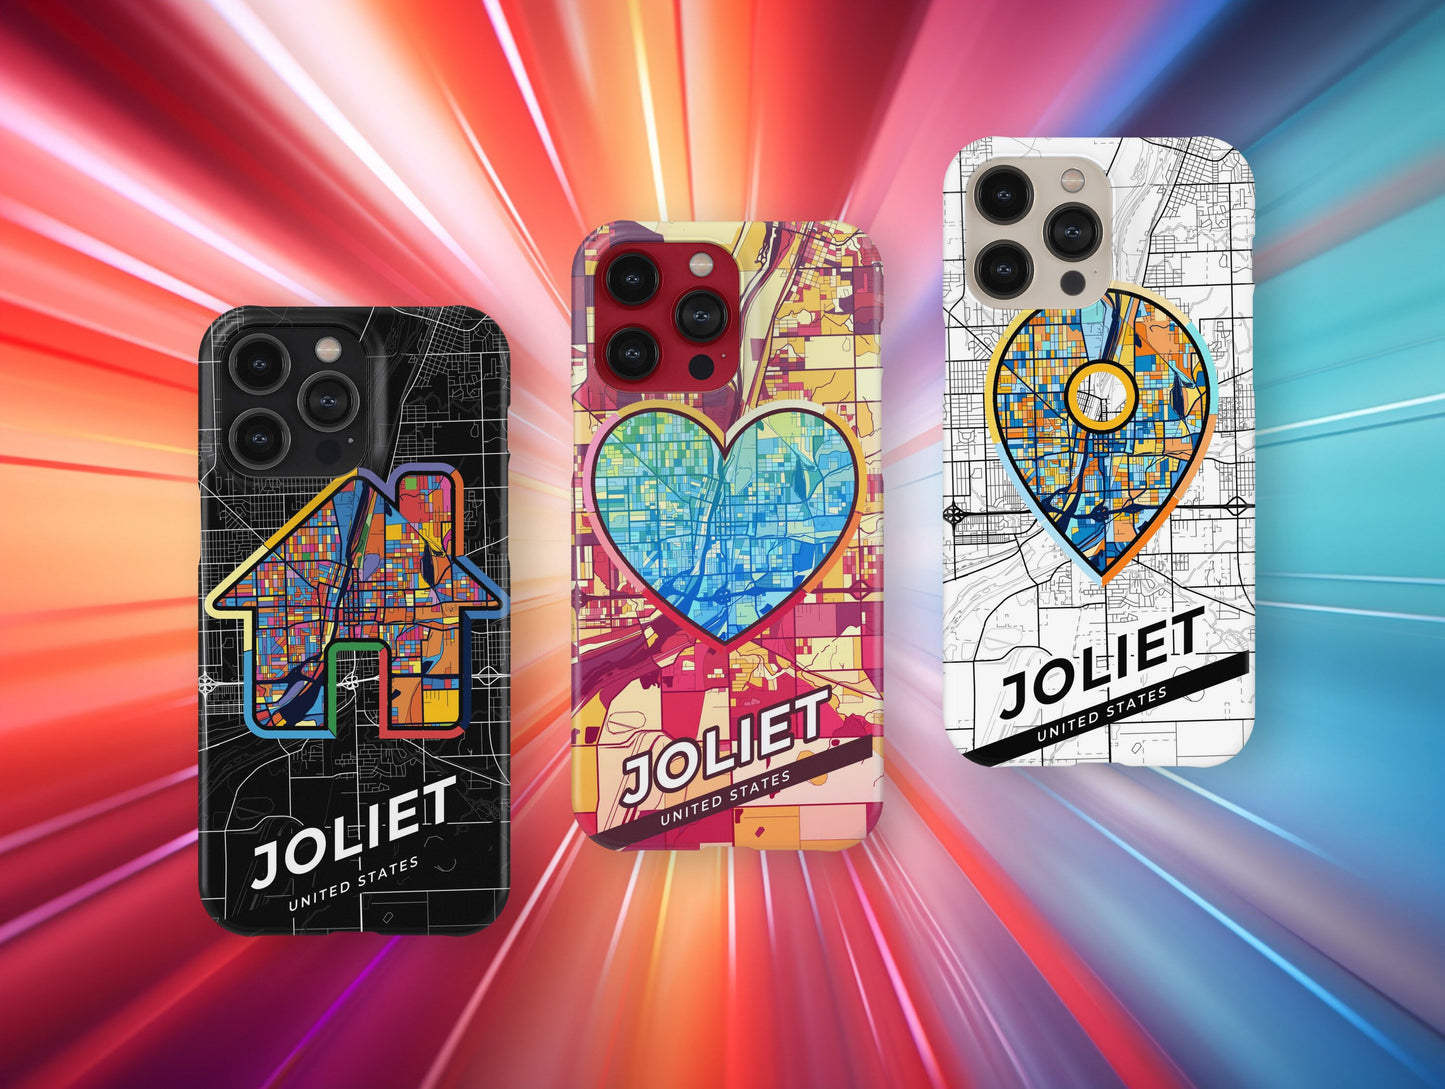 Joliet Illinois slim phone case with colorful icon. Birthday, wedding or housewarming gift. Couple match cases.